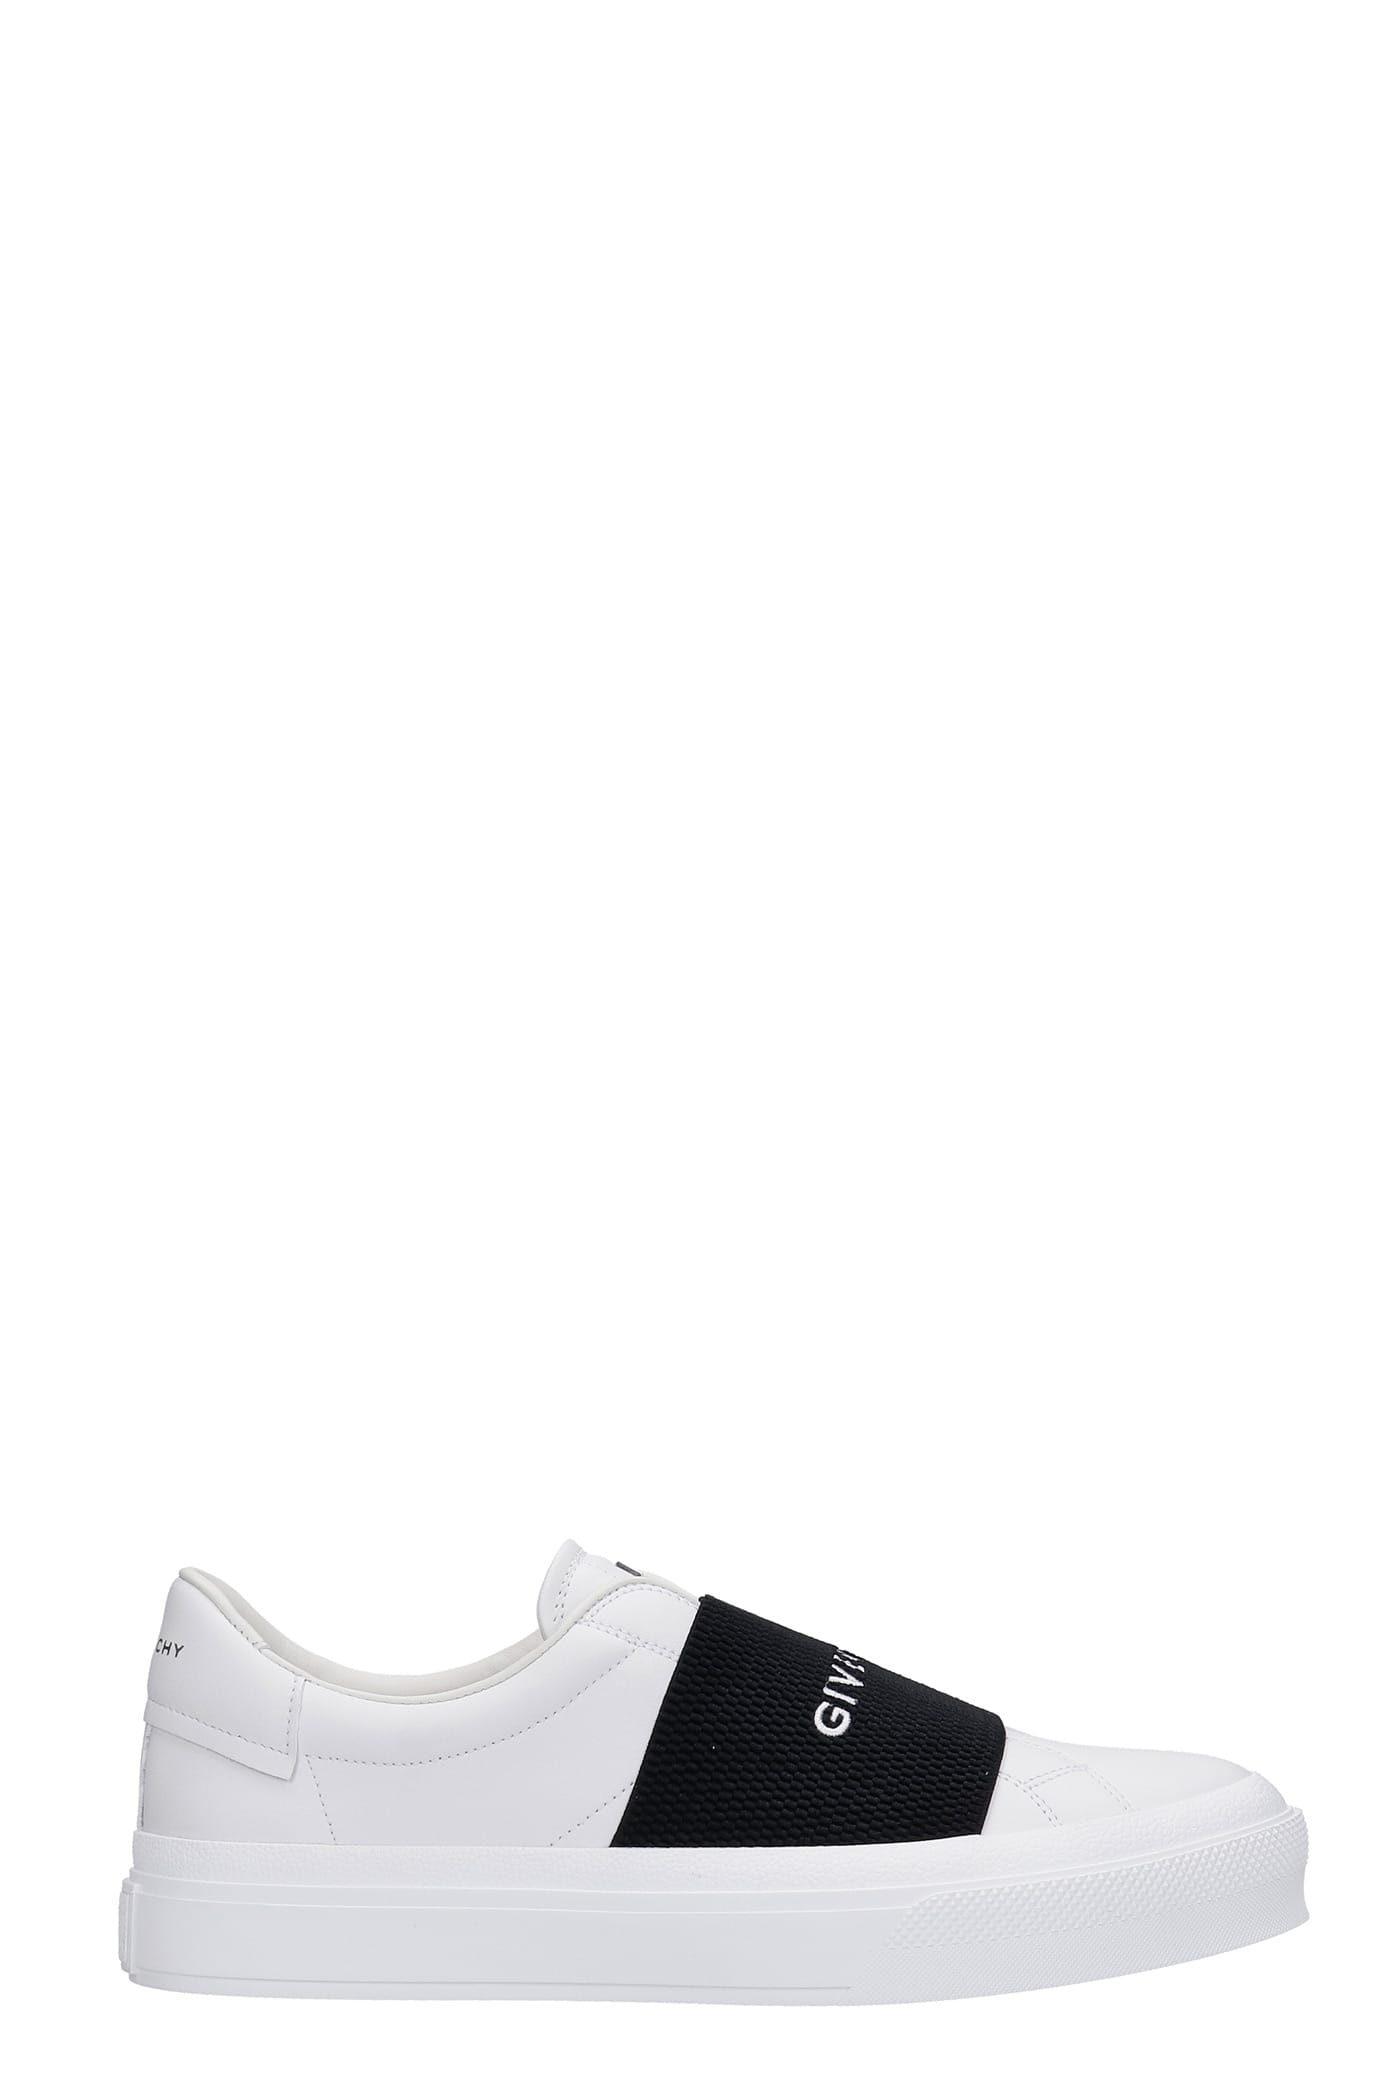 Givenchy City Court Sneakers In White Leather